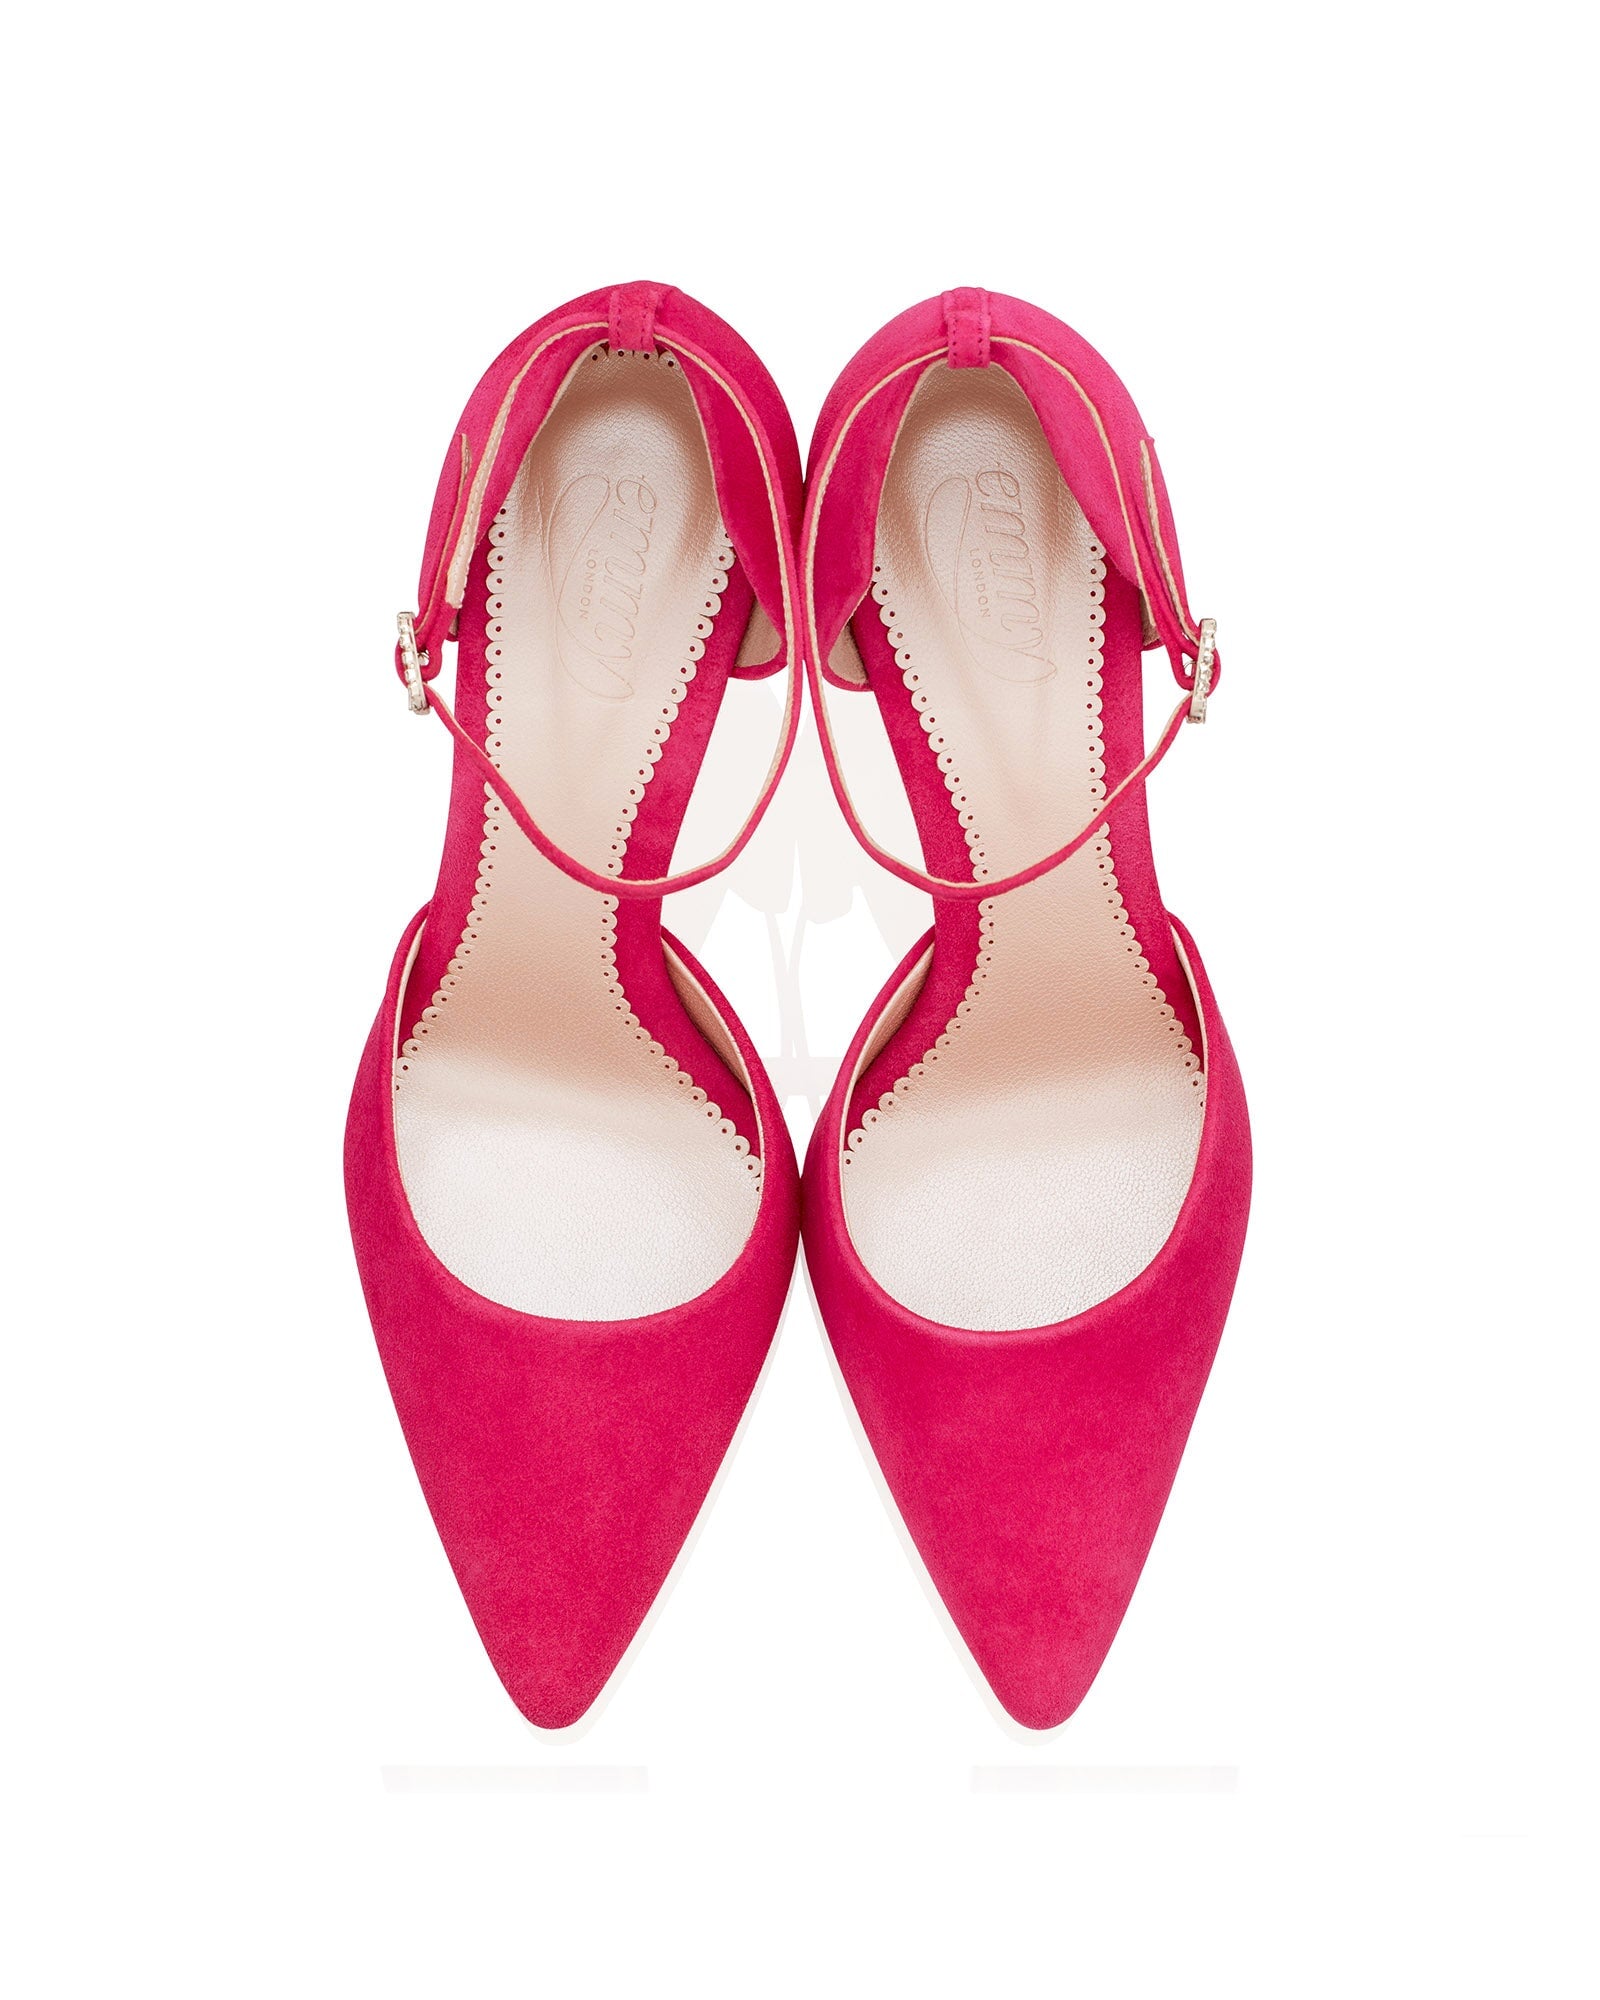 Harriet Hot Pink Fashion Shoe Pink Heels with Ankle Tie Sash  image